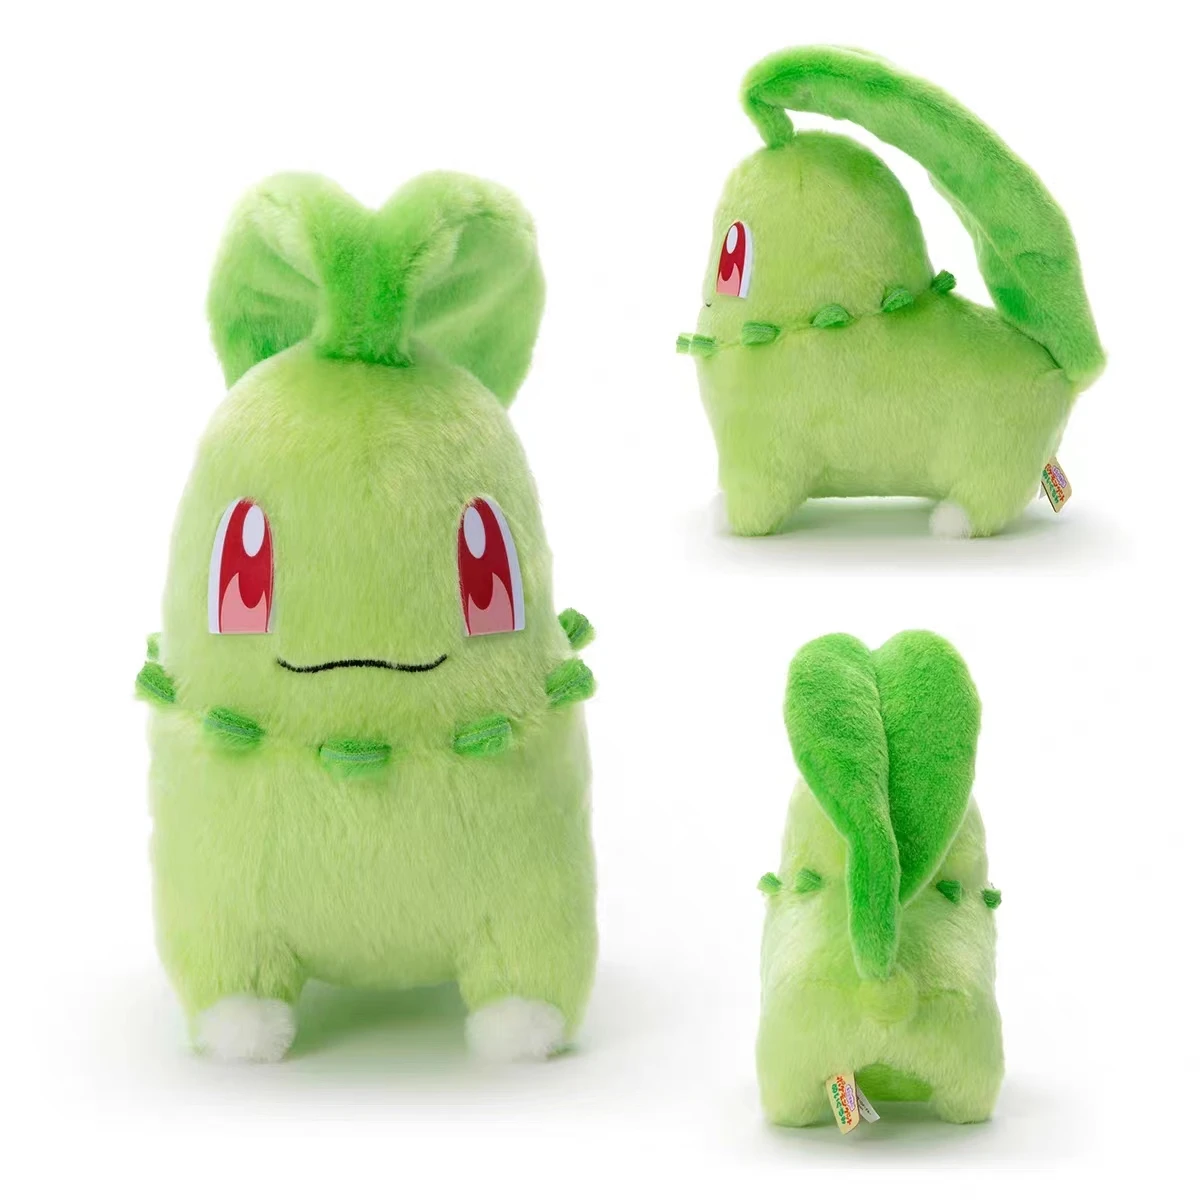 20cm Anime Pokemon Chikorita Stuffed Kawaii Plush Toys Room Decoration Ornaments Gift for Children Toys face less old man snowman candle silicone mold diy christmas tree handmade ornaments dripping plaster decoration mold